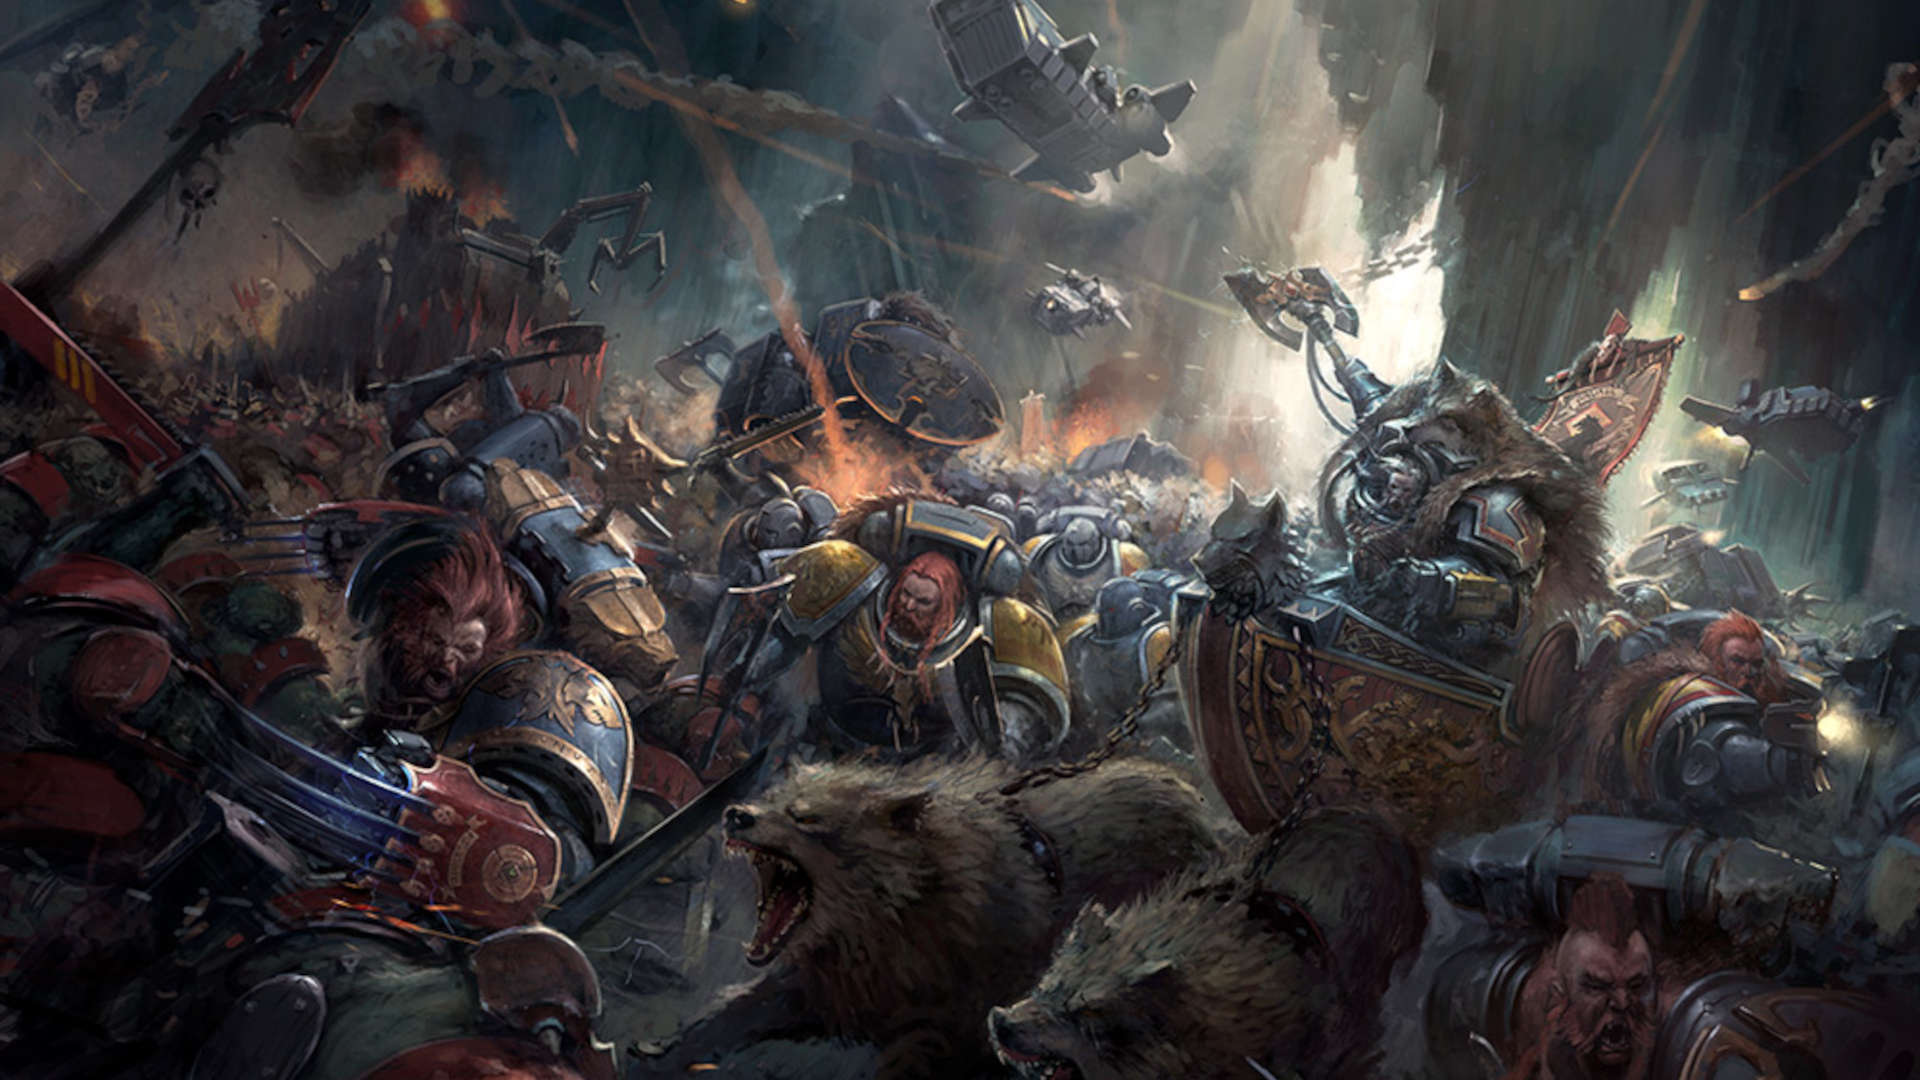 Warhammer 40k Space Wolves illustration by Games Workshop - a huge force of grey-armoured warriors surge to war, surrounded by wolves, their leader in a great hovering chariot